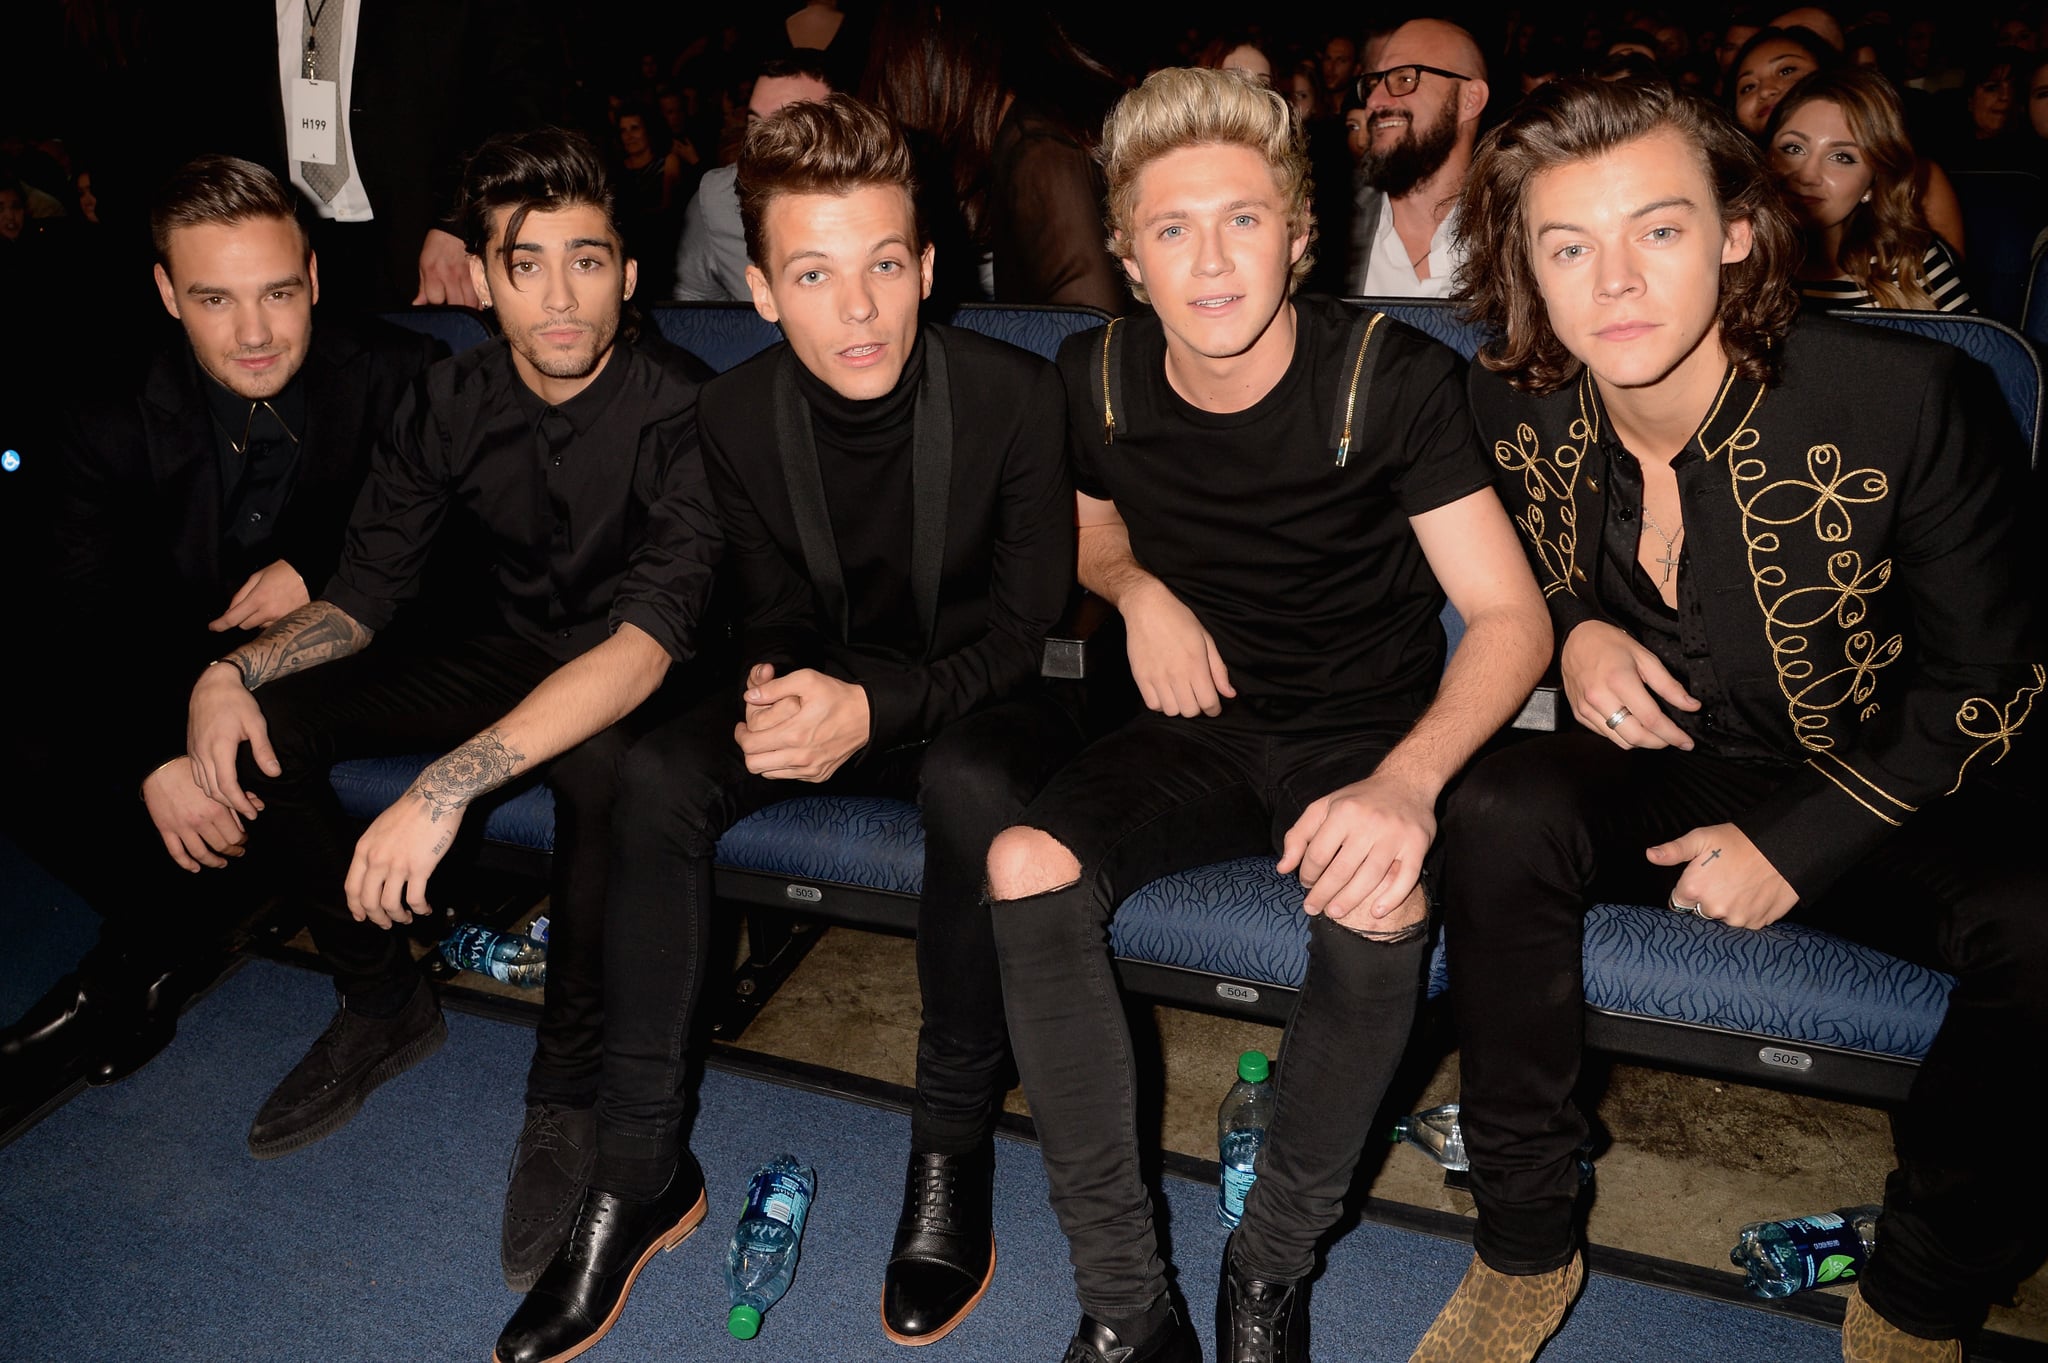 LOS ANGELES, CA - NOVEMBER 23:  (L-R) Singers Liam Payne, Zayn Malik, Louis Tomlinson, Niall Horan and Harry Styles of One Direction attend the 2014 American Music Awards at Nokia Theatre L.A. Live on November 23, 2014 in Los Angeles, California.  (Photo by Jeff Kravitz/AMA2014/FilmMagic)